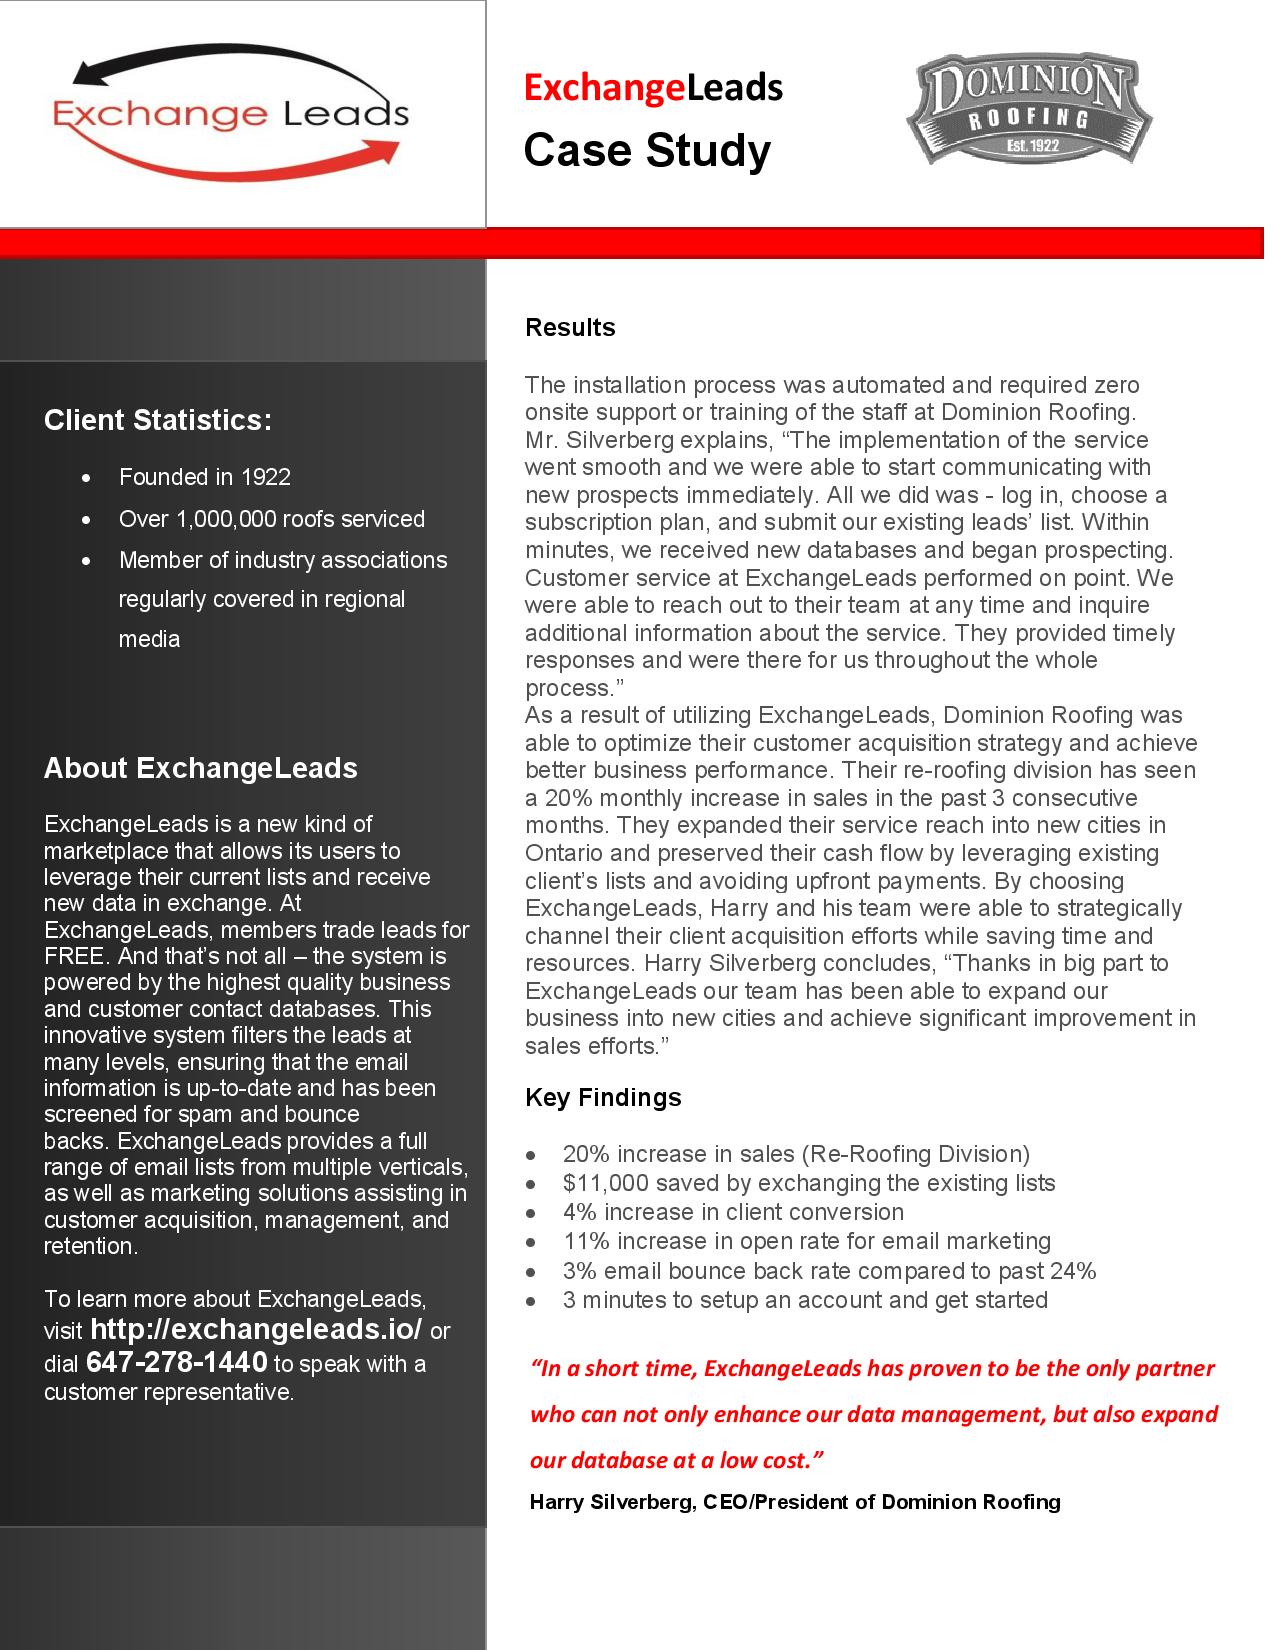 Case Study Exchangeleads (Domion Roofing) (1)-page-002